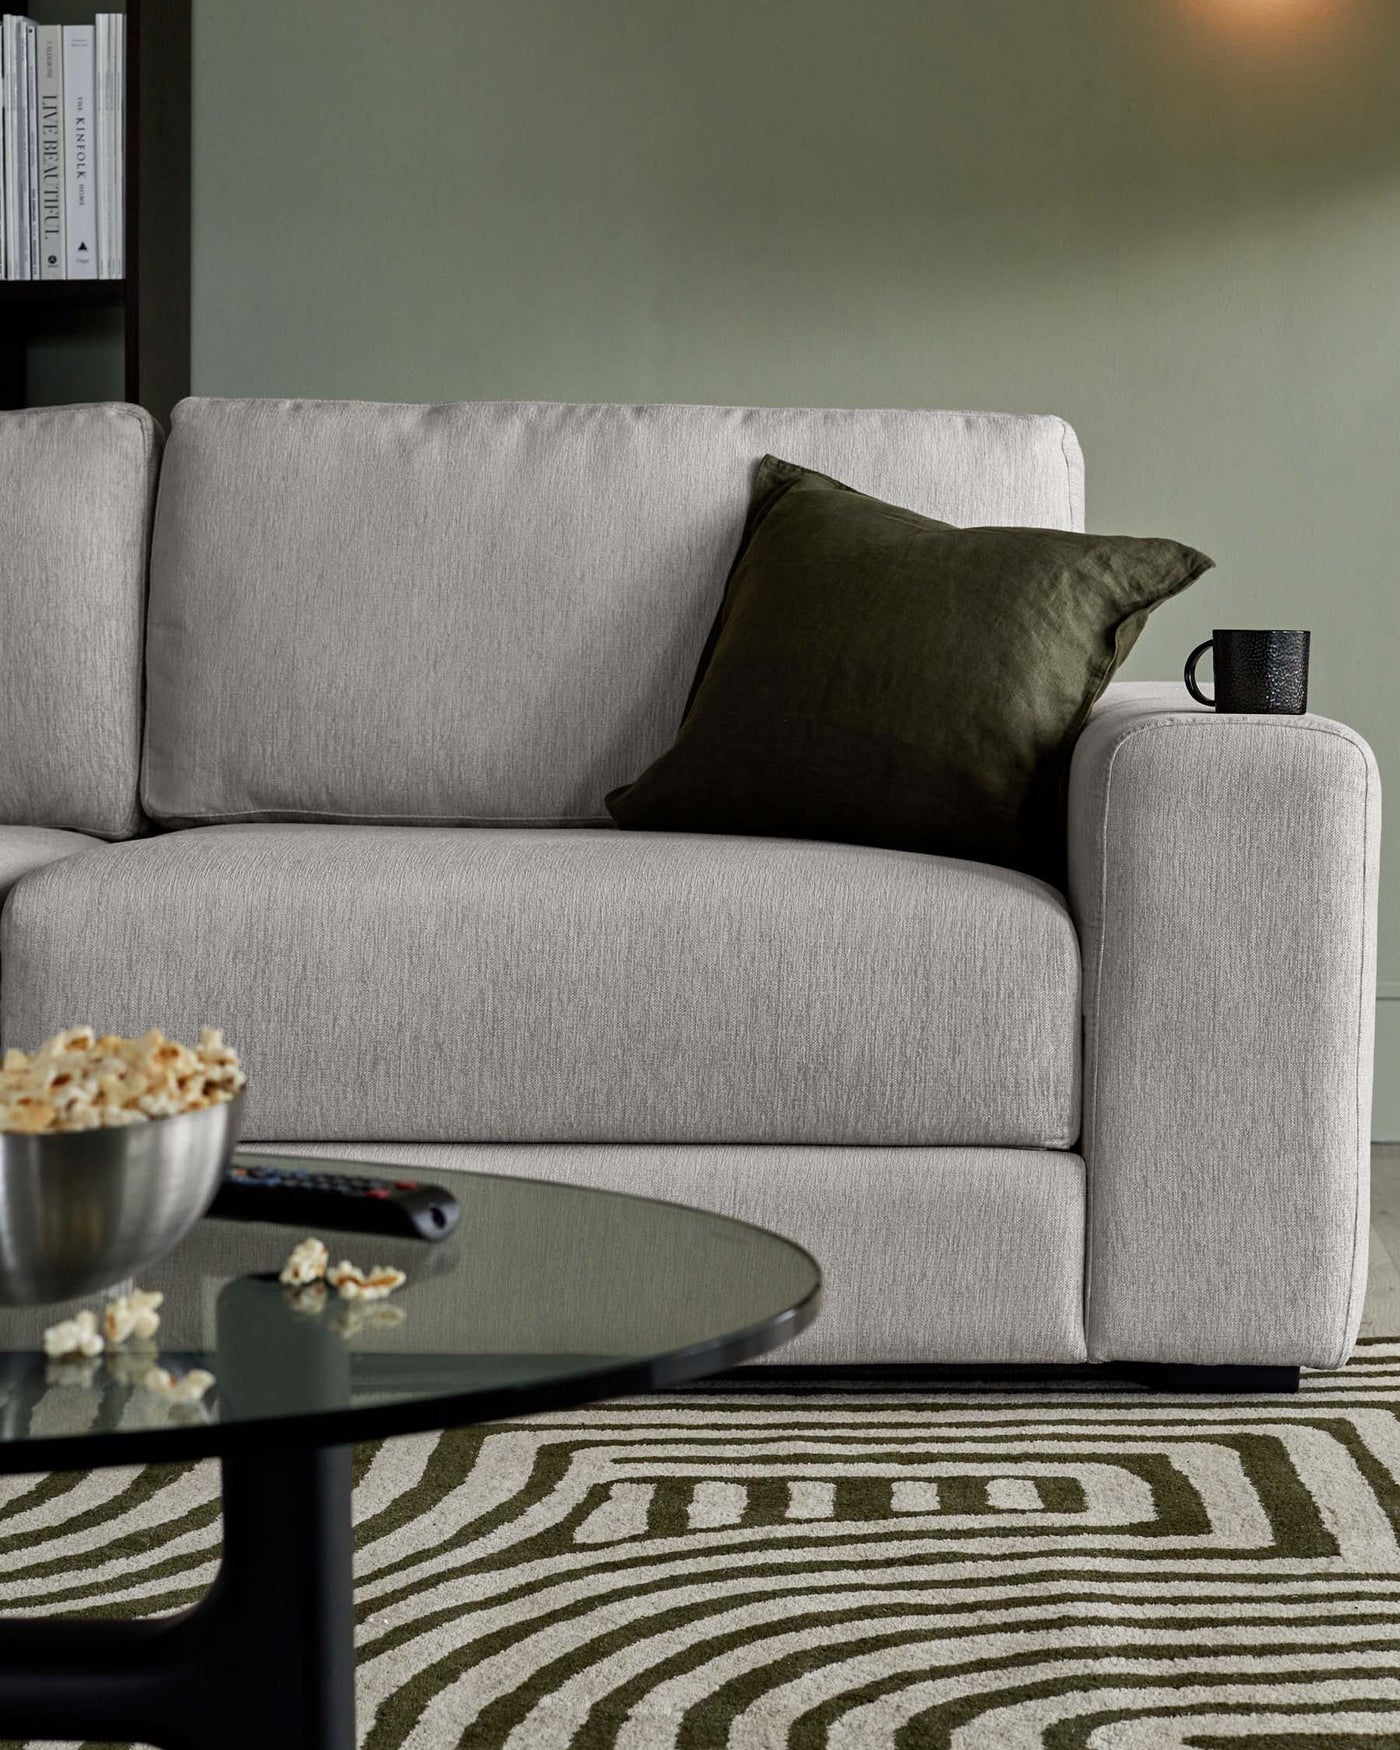 Modern light grey fabric sofa with clean lines and simplistic design, featuring one armrest, complemented with a dark green decorative pillow. In the foreground, there's a round, black coffee table with a glass top, and underneath is a patterned off-white and green area rug. Beside the sofa, a small black cup sits atop a matching narrow cylindrical stand.